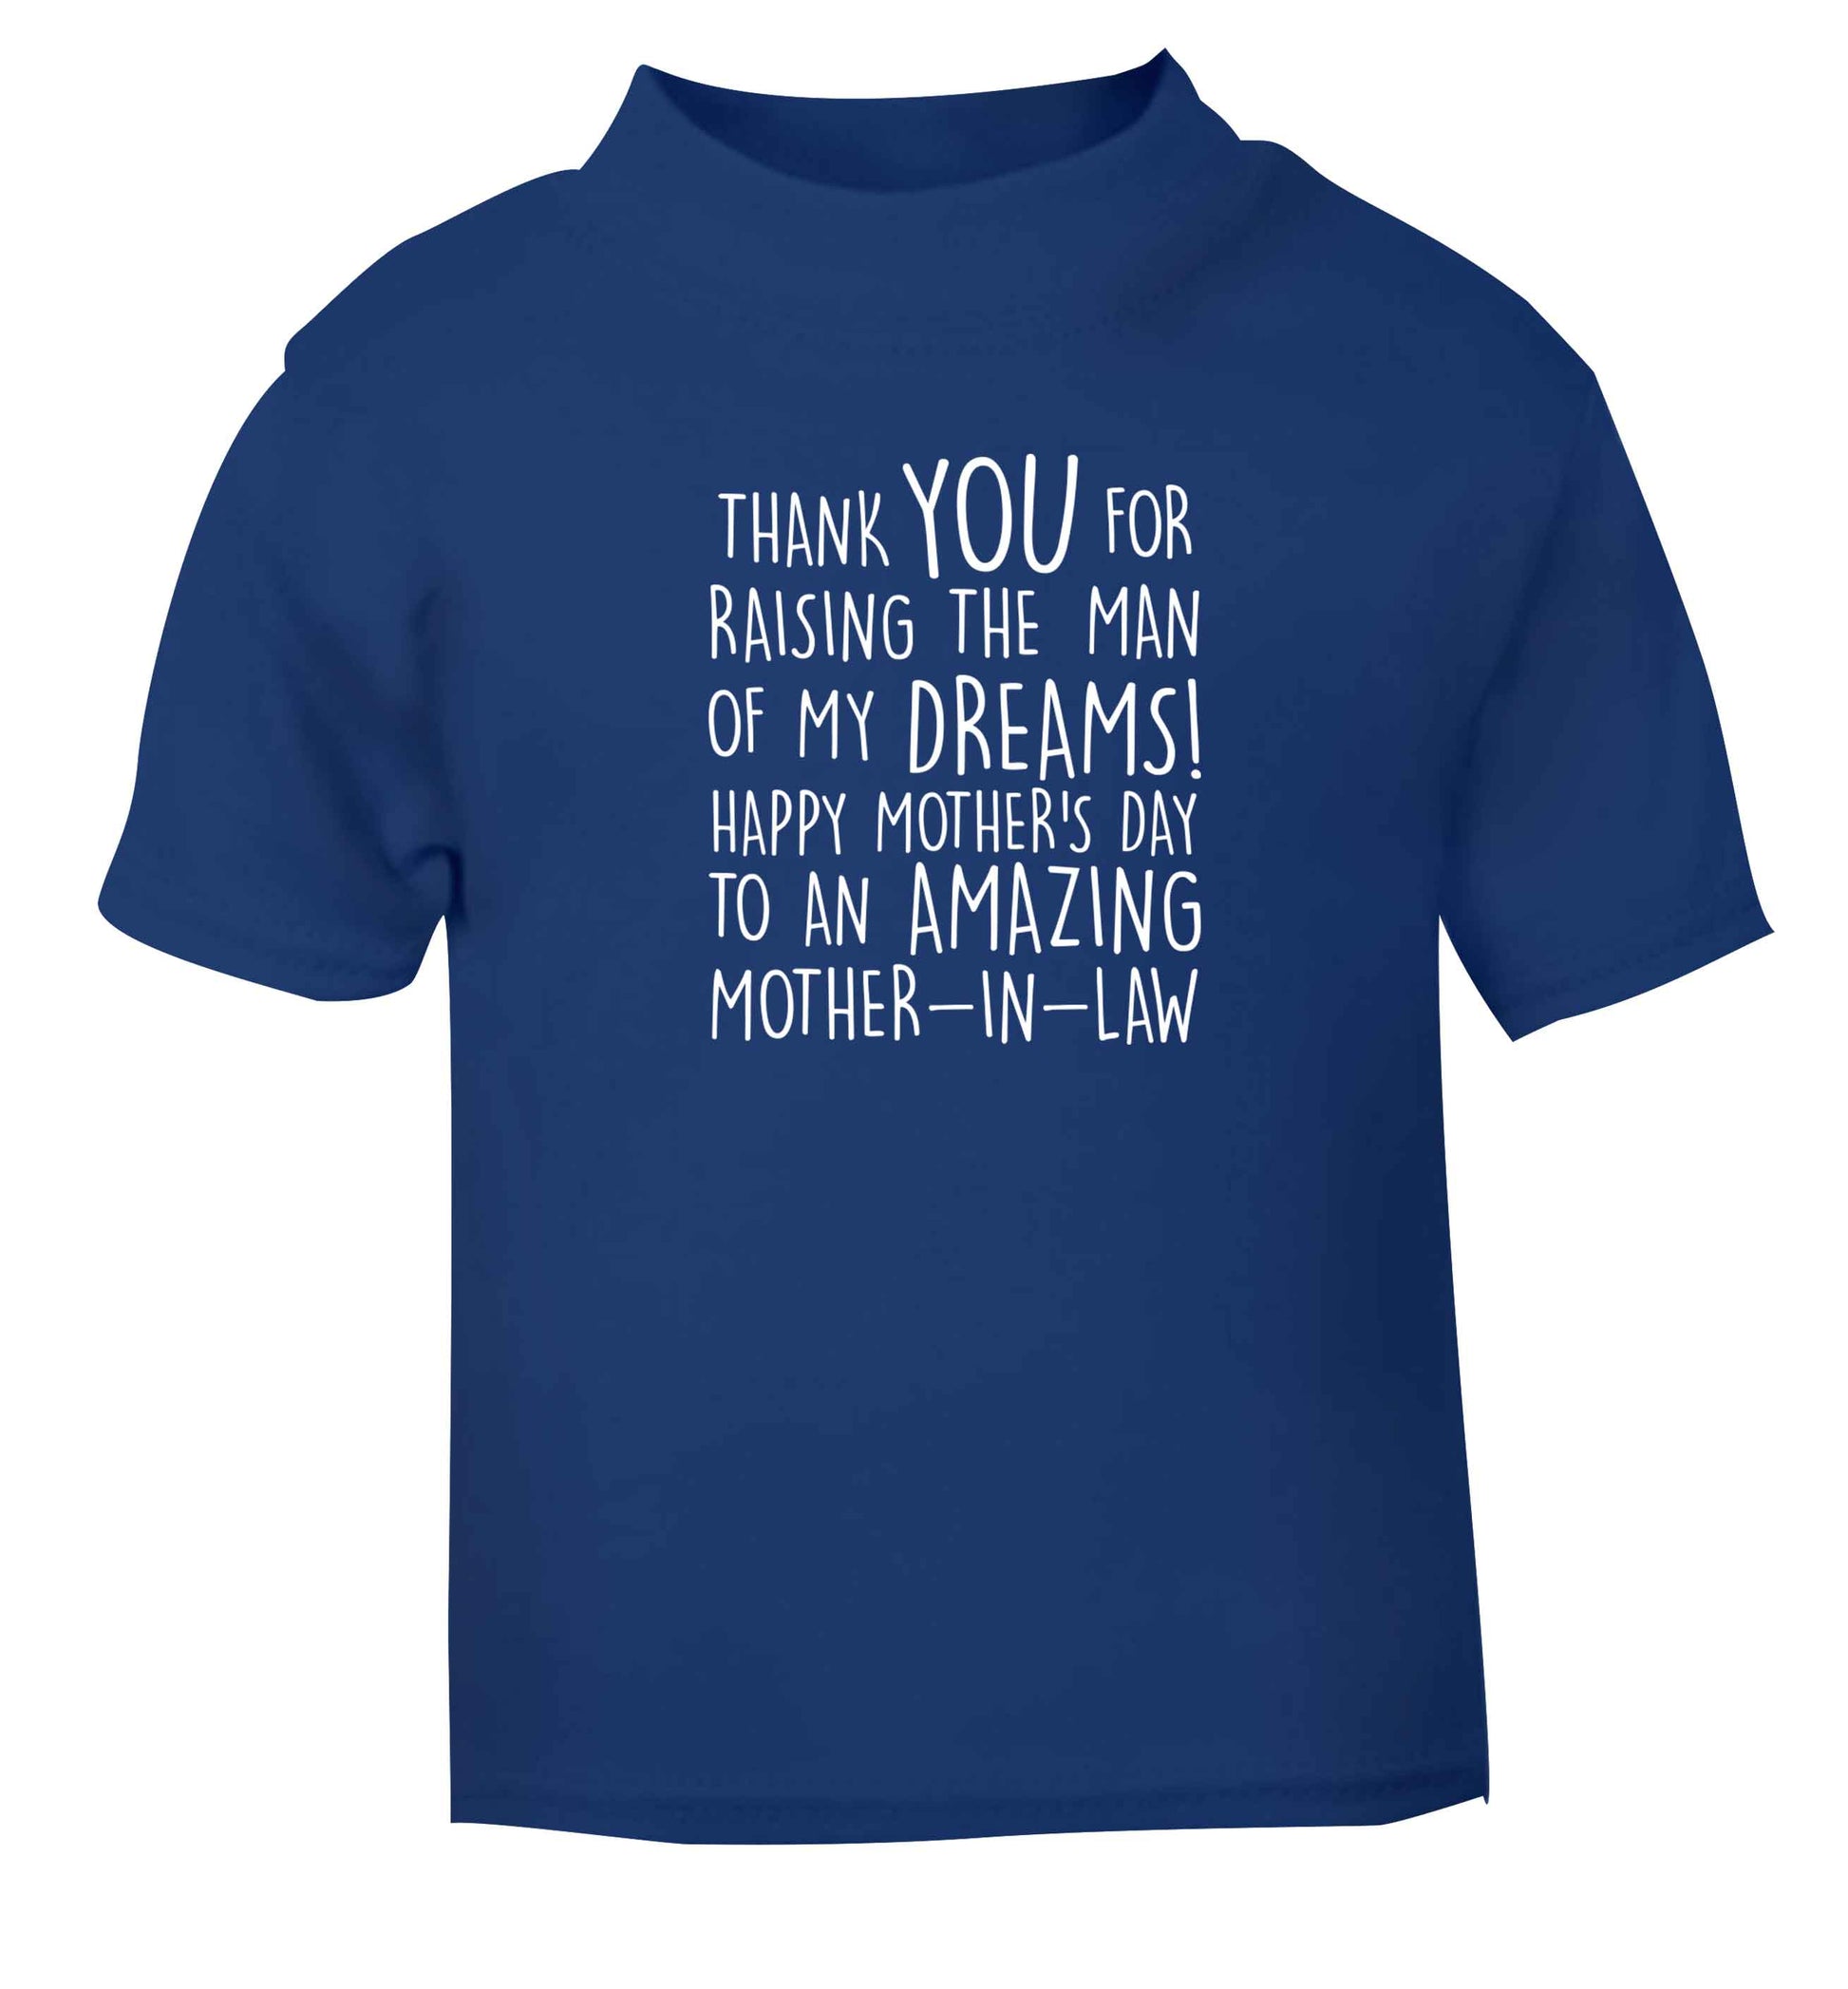 Raising the man of my dreams mother's day mother-in-law blue baby toddler Tshirt 2 Years